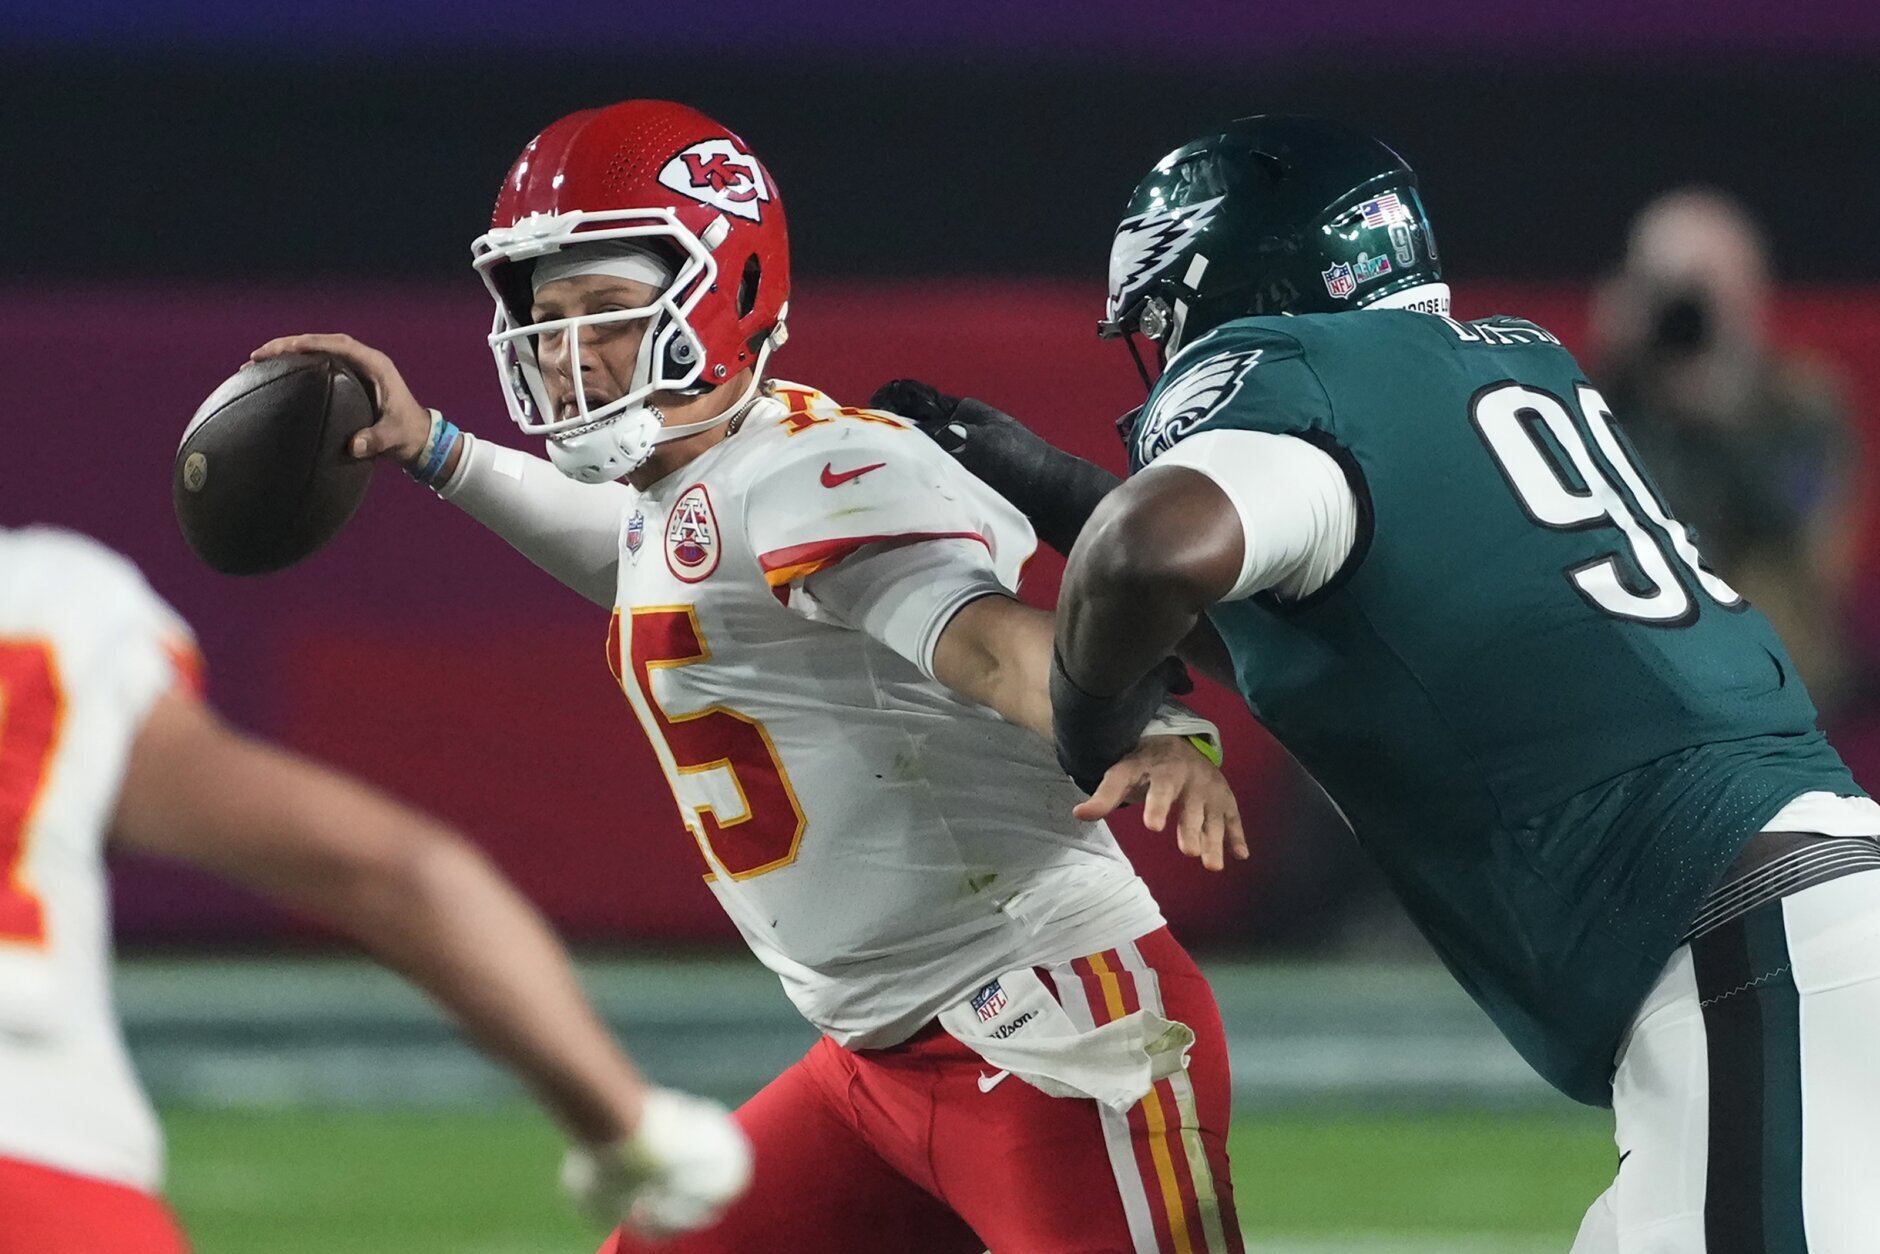 Super Bowl uniforms 2023: What jerseys will Chiefs, Eagles wear during  Super Bowl 57?